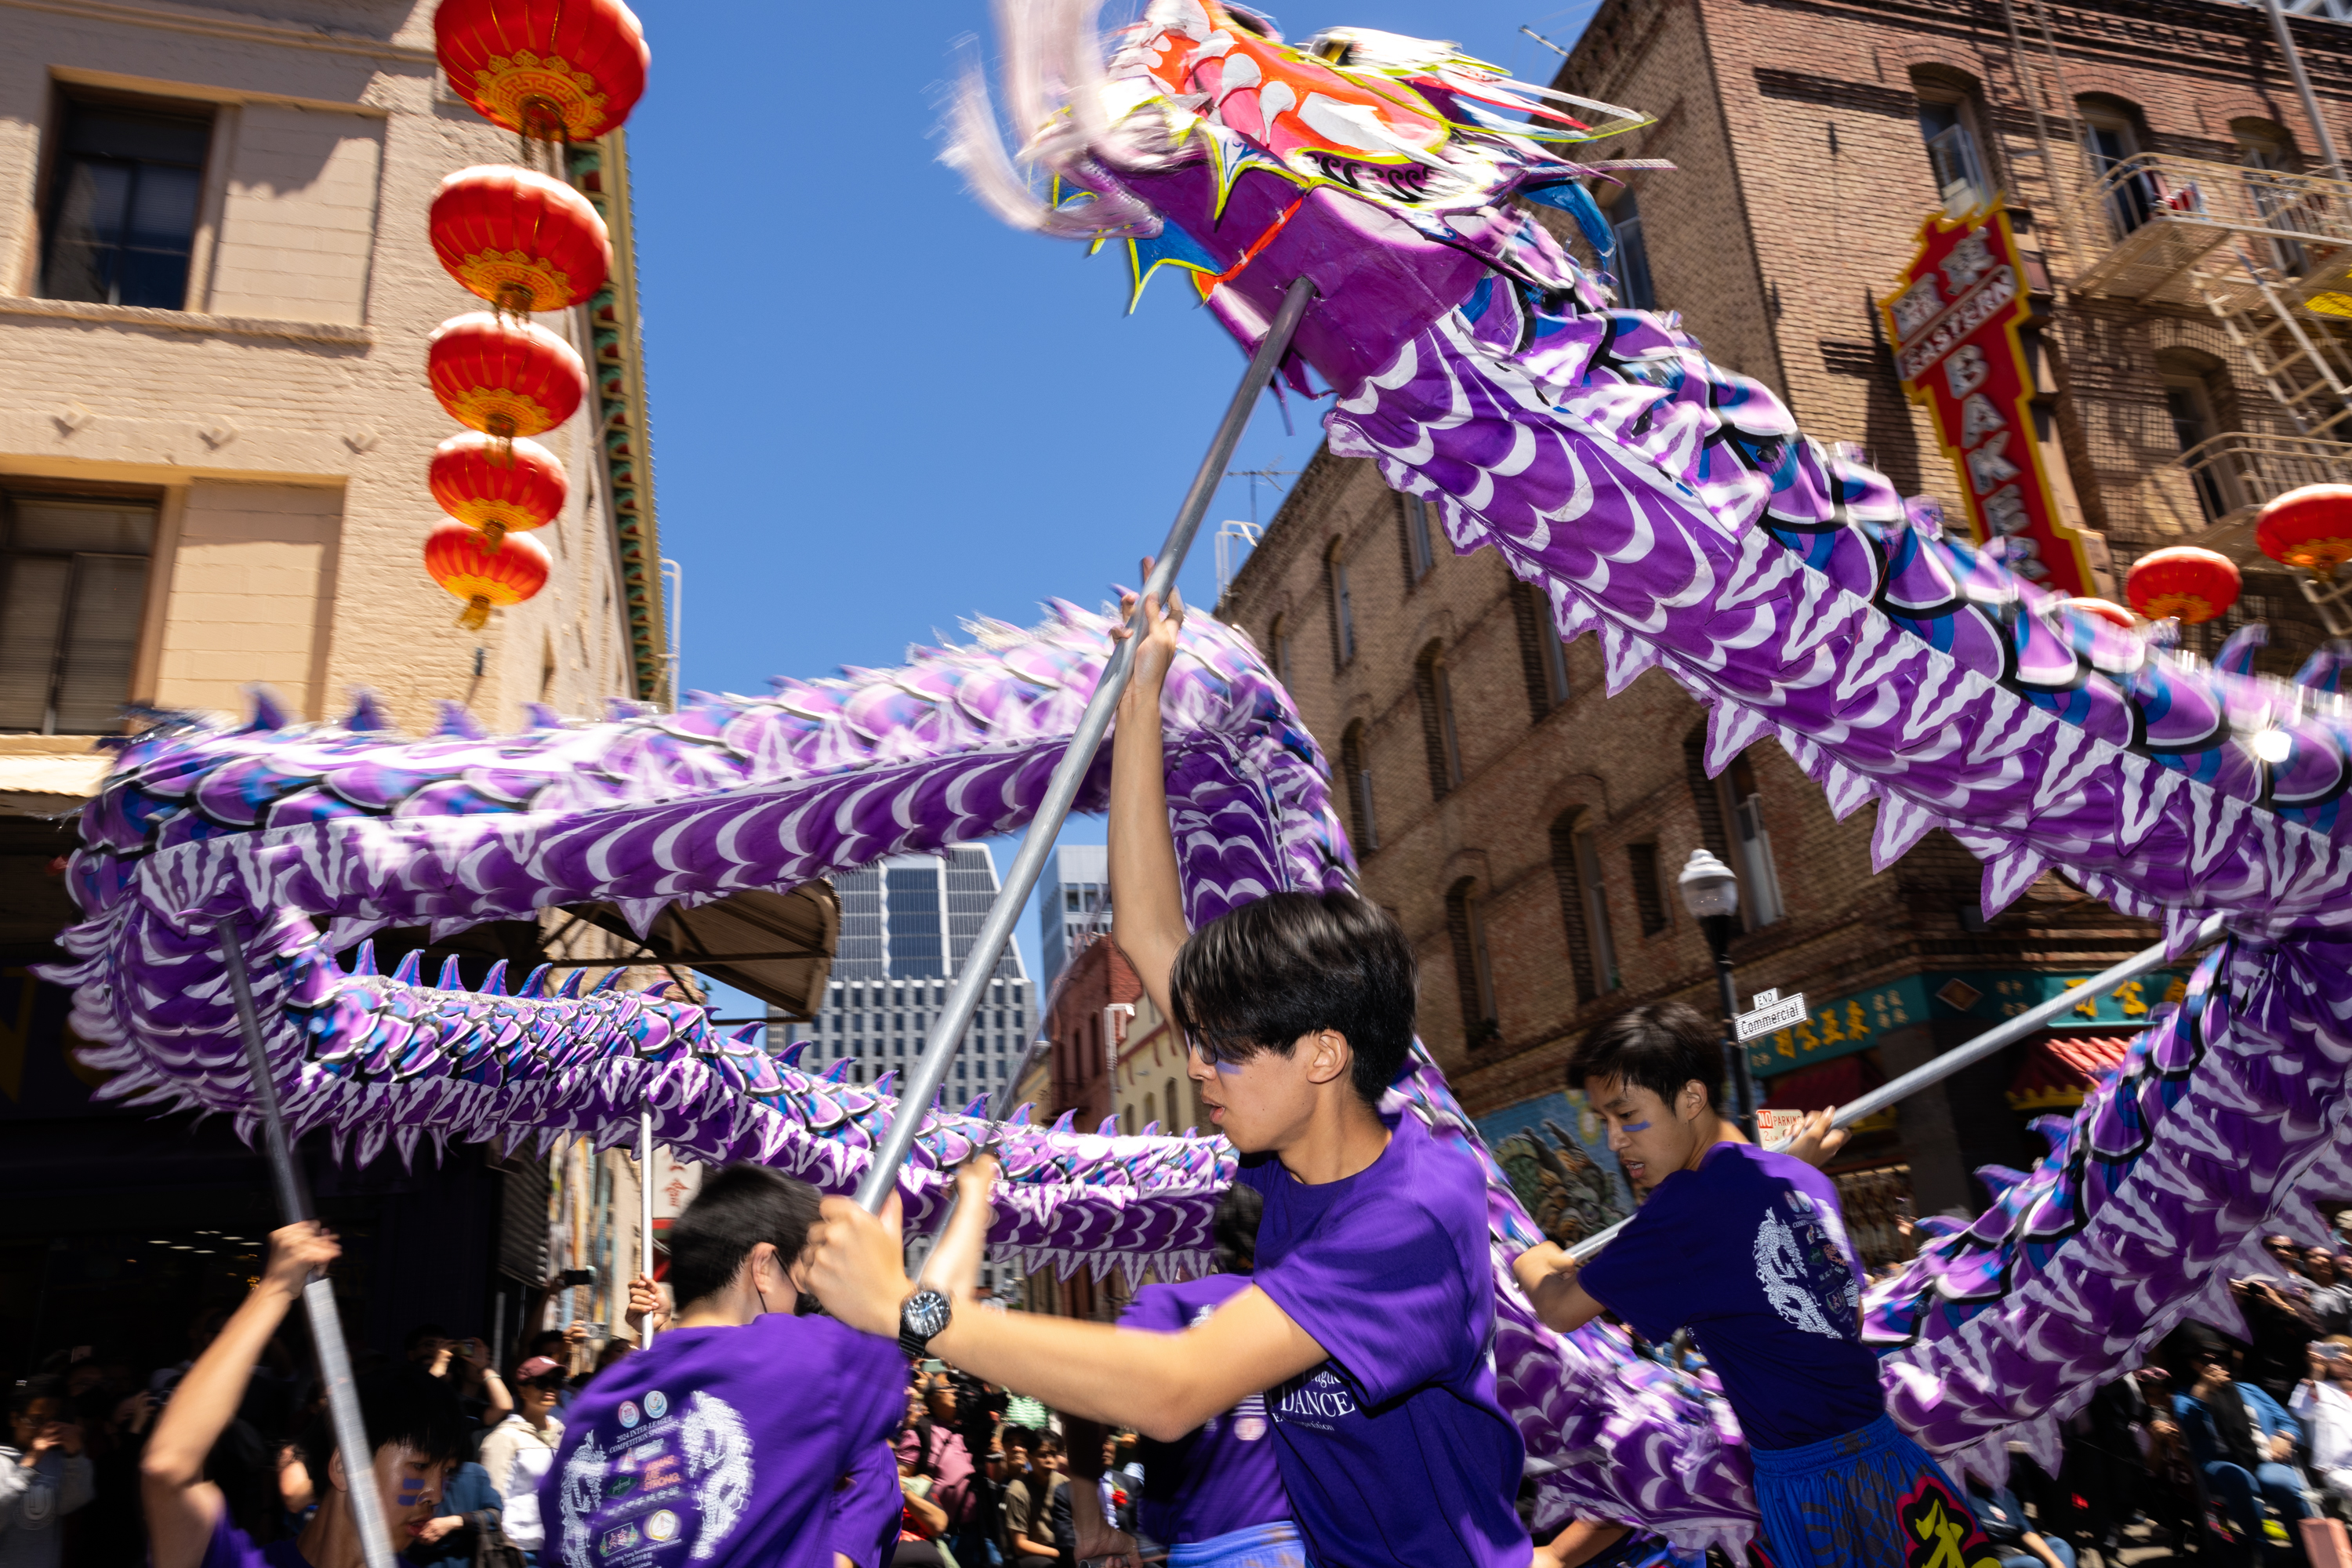 People perform a dragon dance under red lanterns in a sunny street parade.